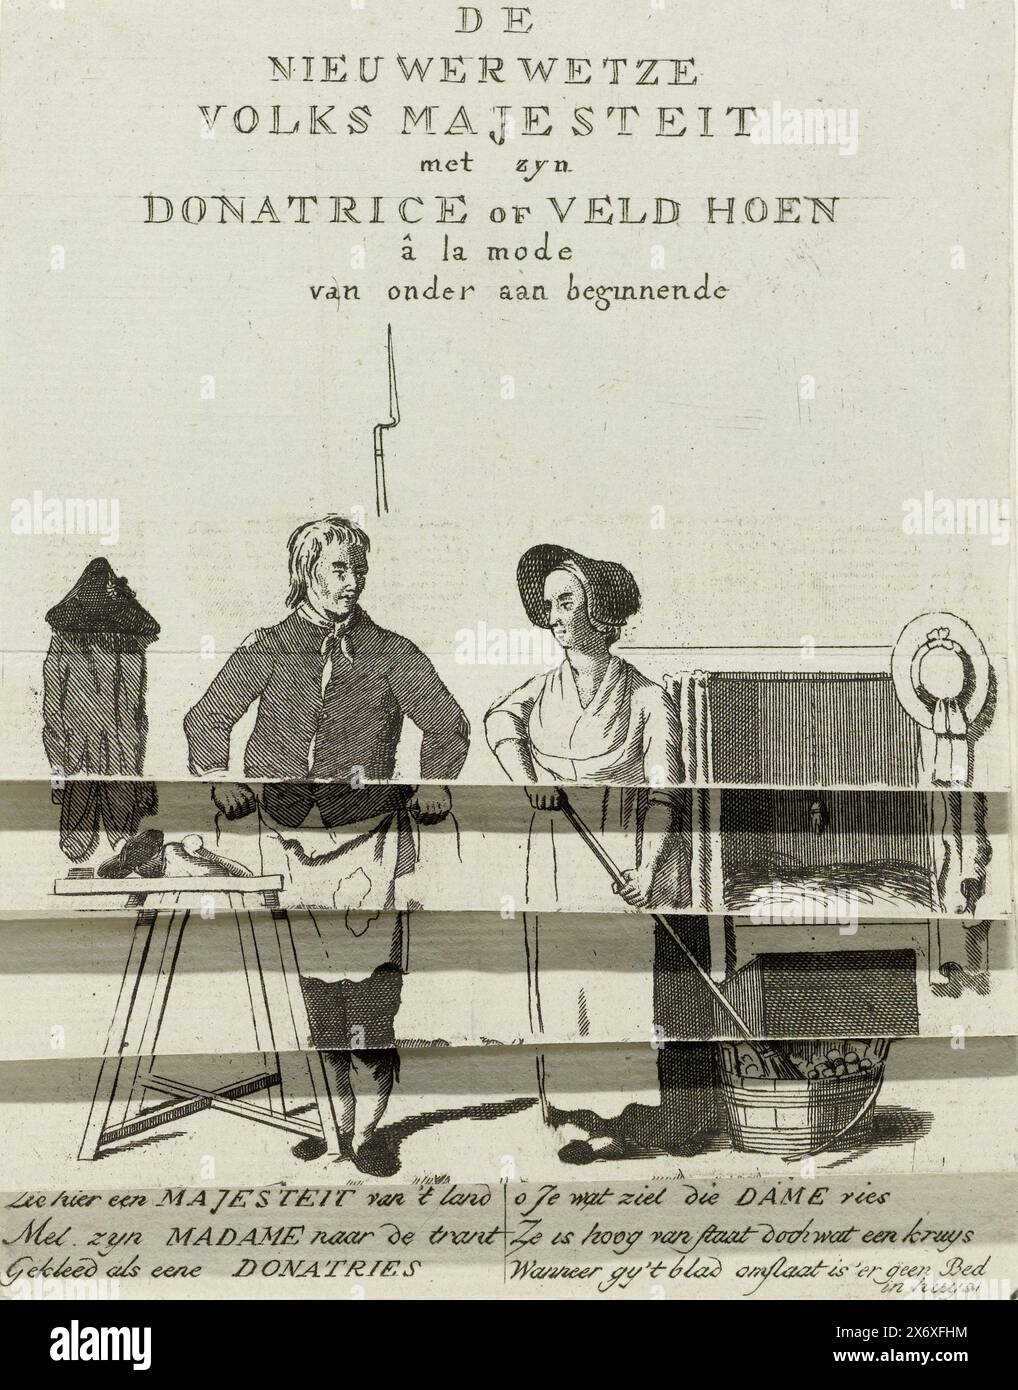 Cartoon on the civilian armament of the Patriots, 1784, The Nieuwerwetze Volks Majesteit with his Donatrice or Veld Hoen â la mode starting from the bottom (title on object), Orangist cartoon on the civilian armament of the Patriots and participation in promoting it by the Dames Donatrices, 1784. Folding print with a simple workman and workwoman who, by folding stoked paper, transform into a member of the Frei Korps and a donor of the corps. In the caption is a six-line verse., print, print maker: anonymous, Northern Netherlands, 1784, paper, etching, height, 175 mm × width, 137 mm Stock Photo